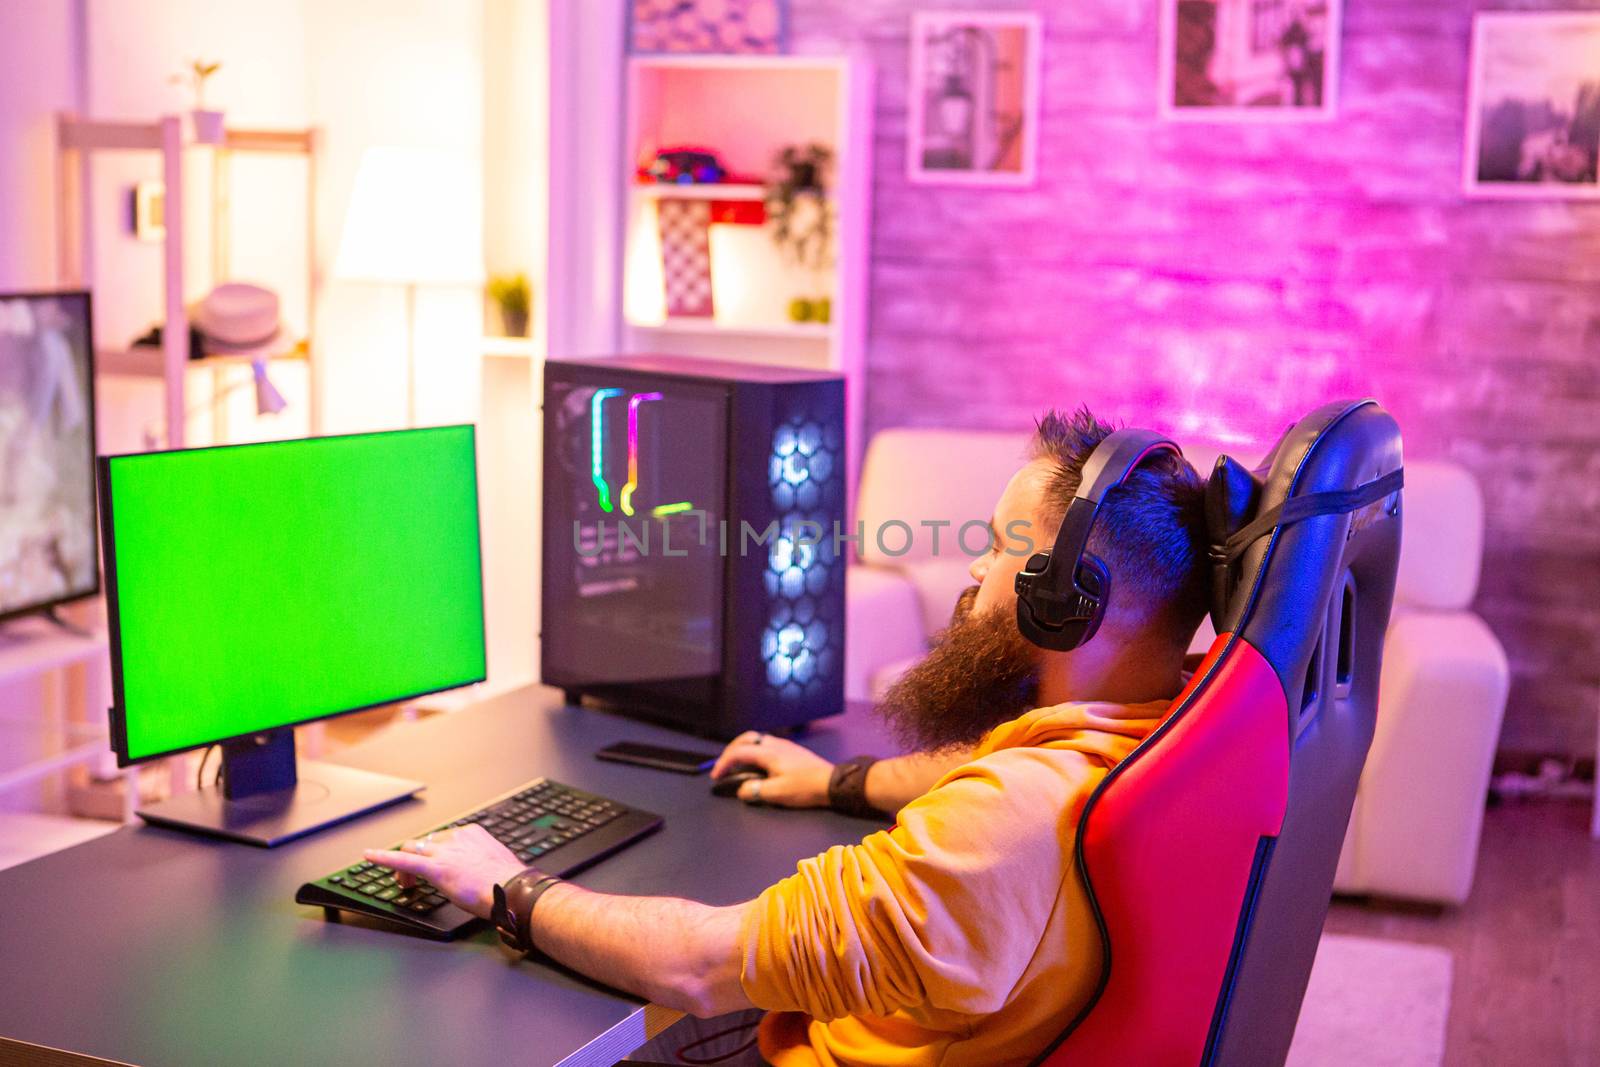 Man playing on powerfull gaming pc in a room with neon lights on a green screen computer.